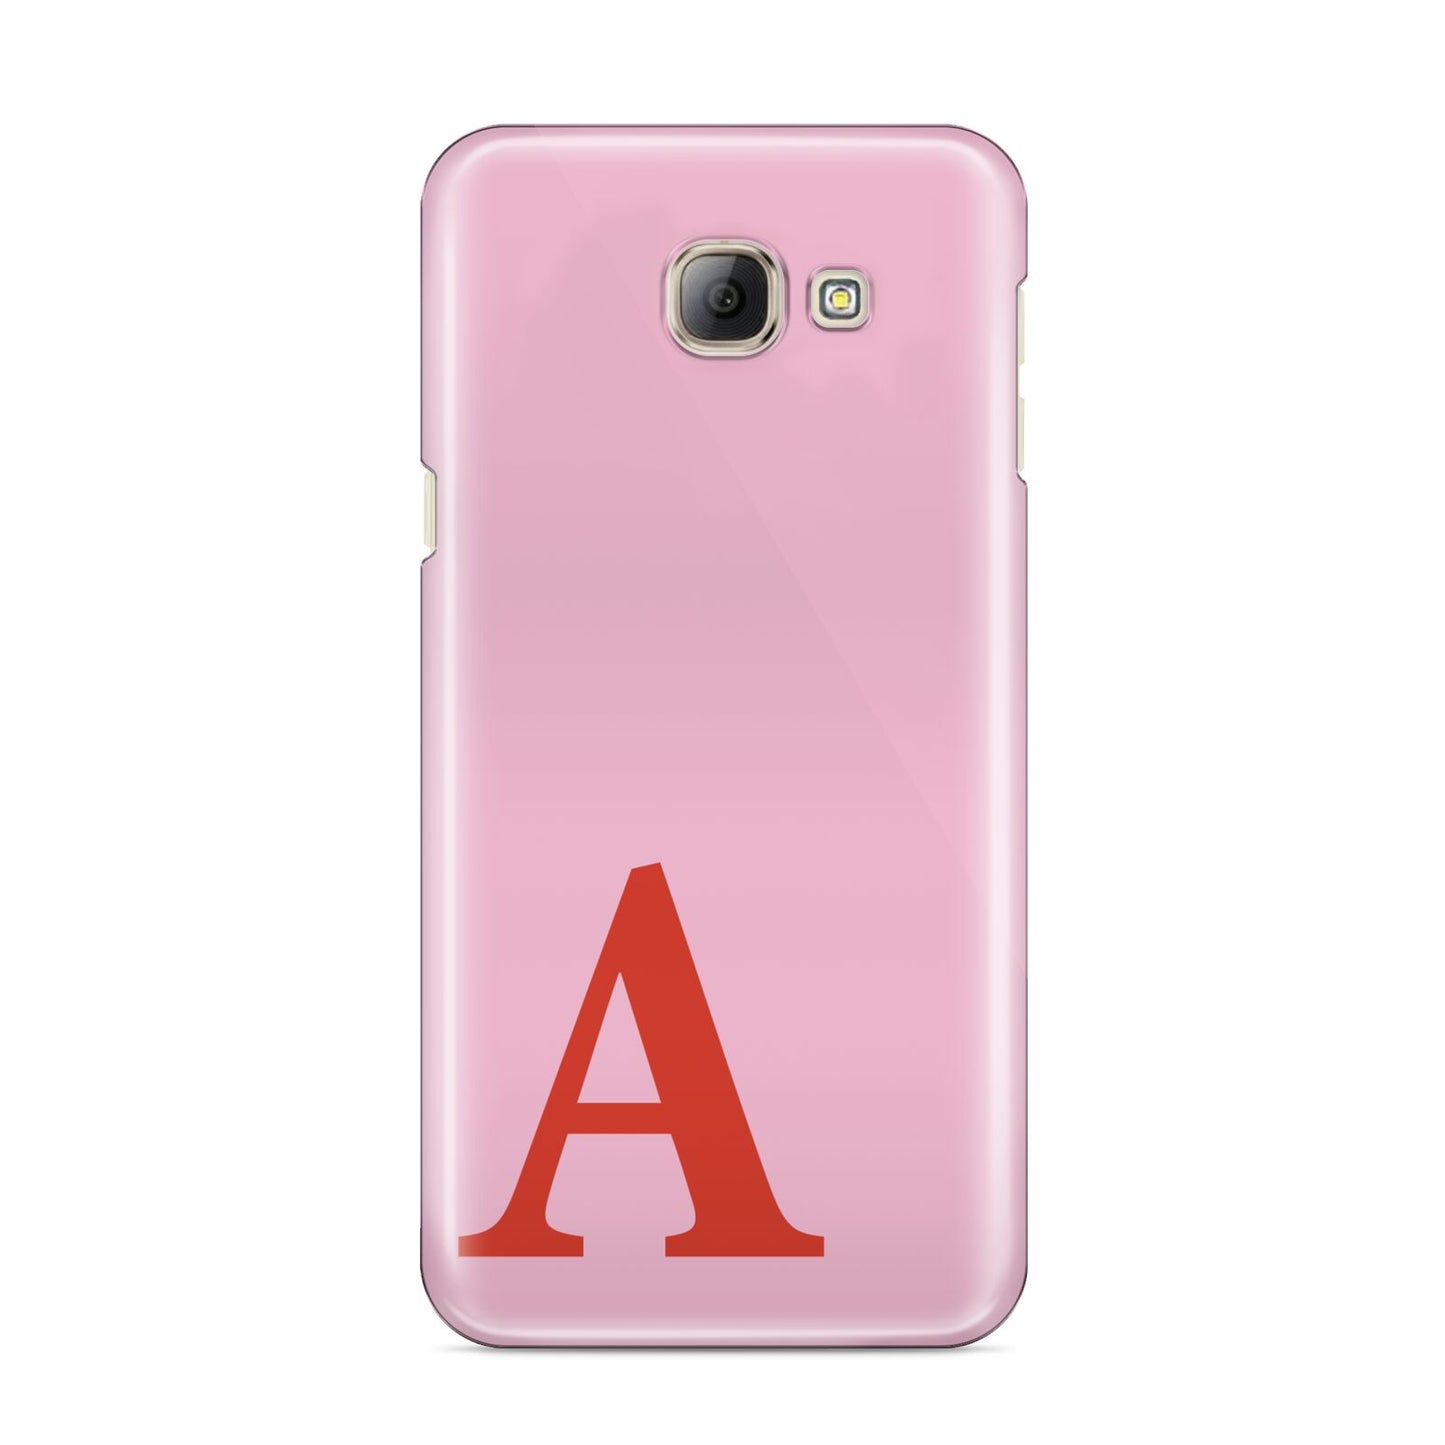 Personalised Pink and Red Samsung Galaxy A8 2016 Case